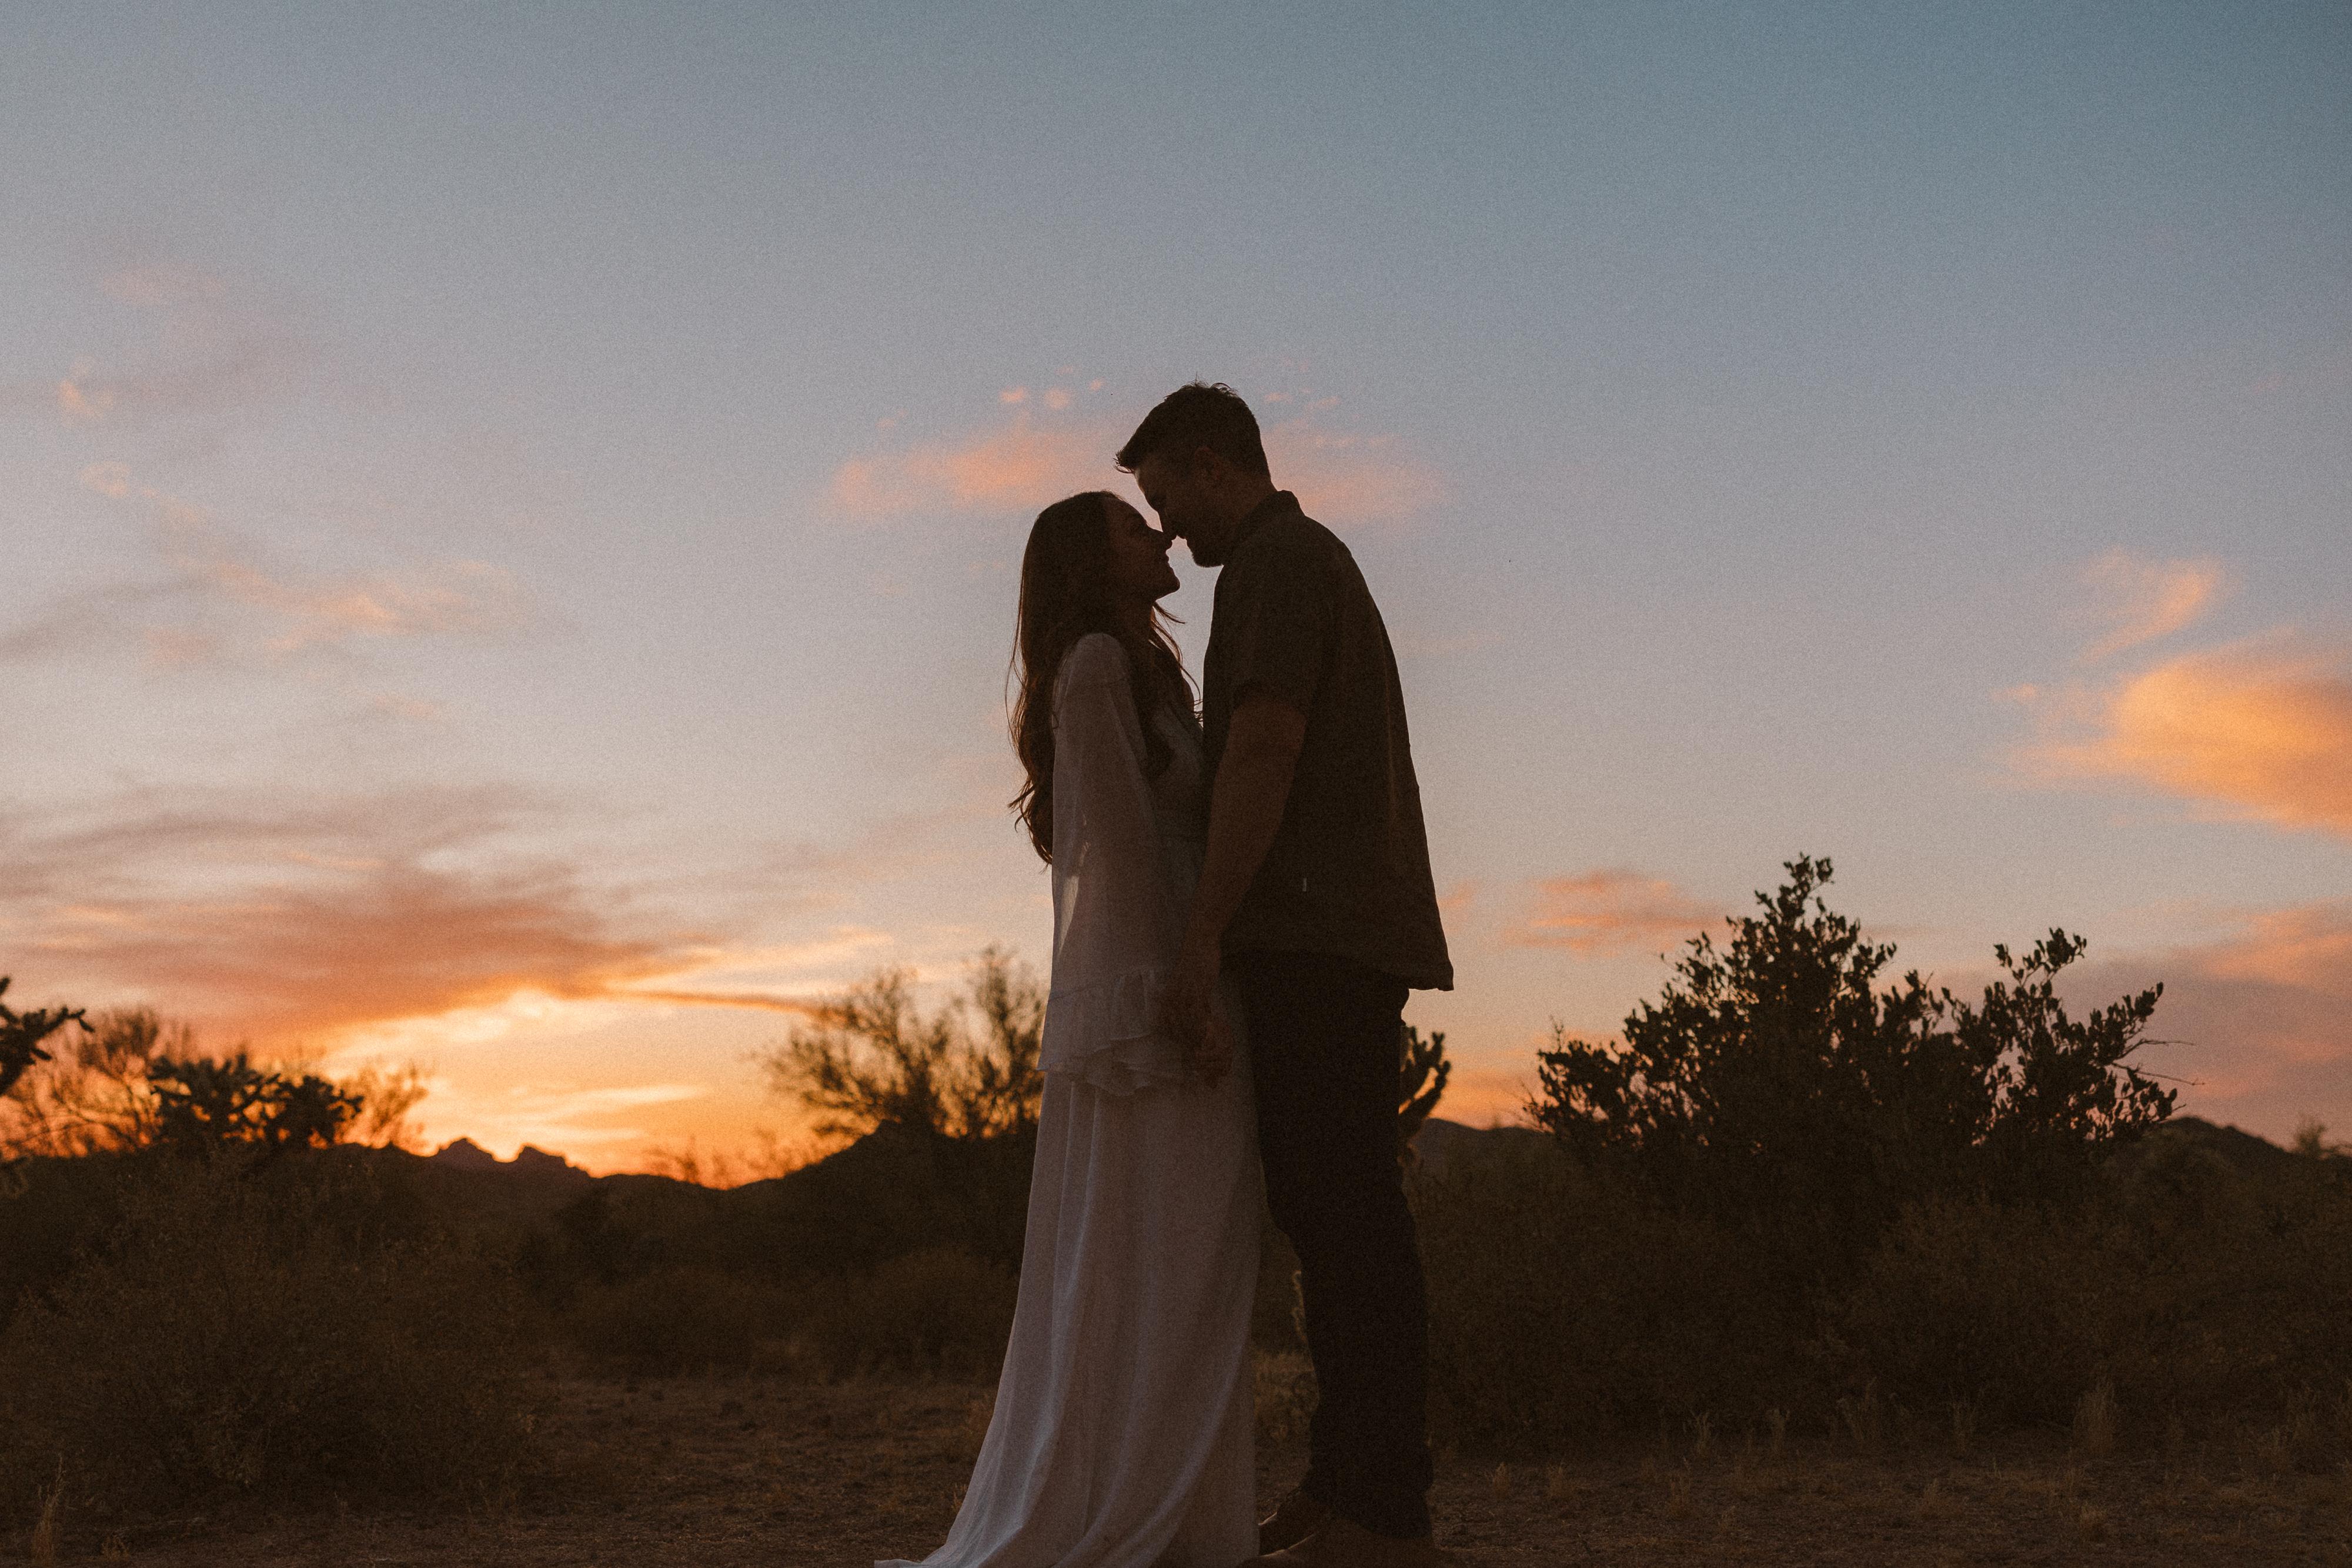 The Wedding Website of Alicia Garcia and Sam Hutchison